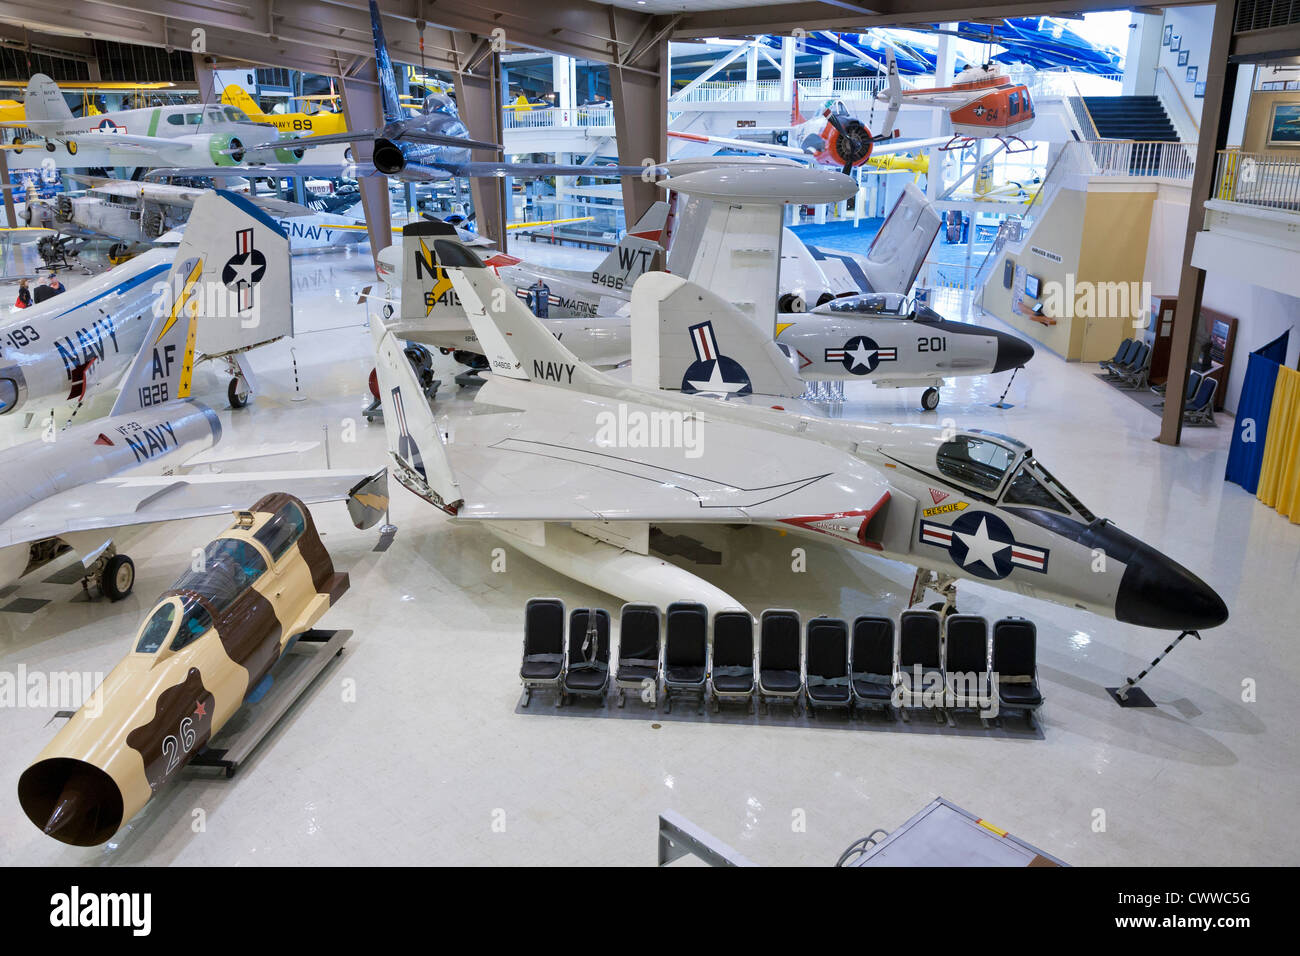 Variety of Navy jets and other aircraft on display at the National Museum of Naval Aviation in Pensacola, FL Stock Photo